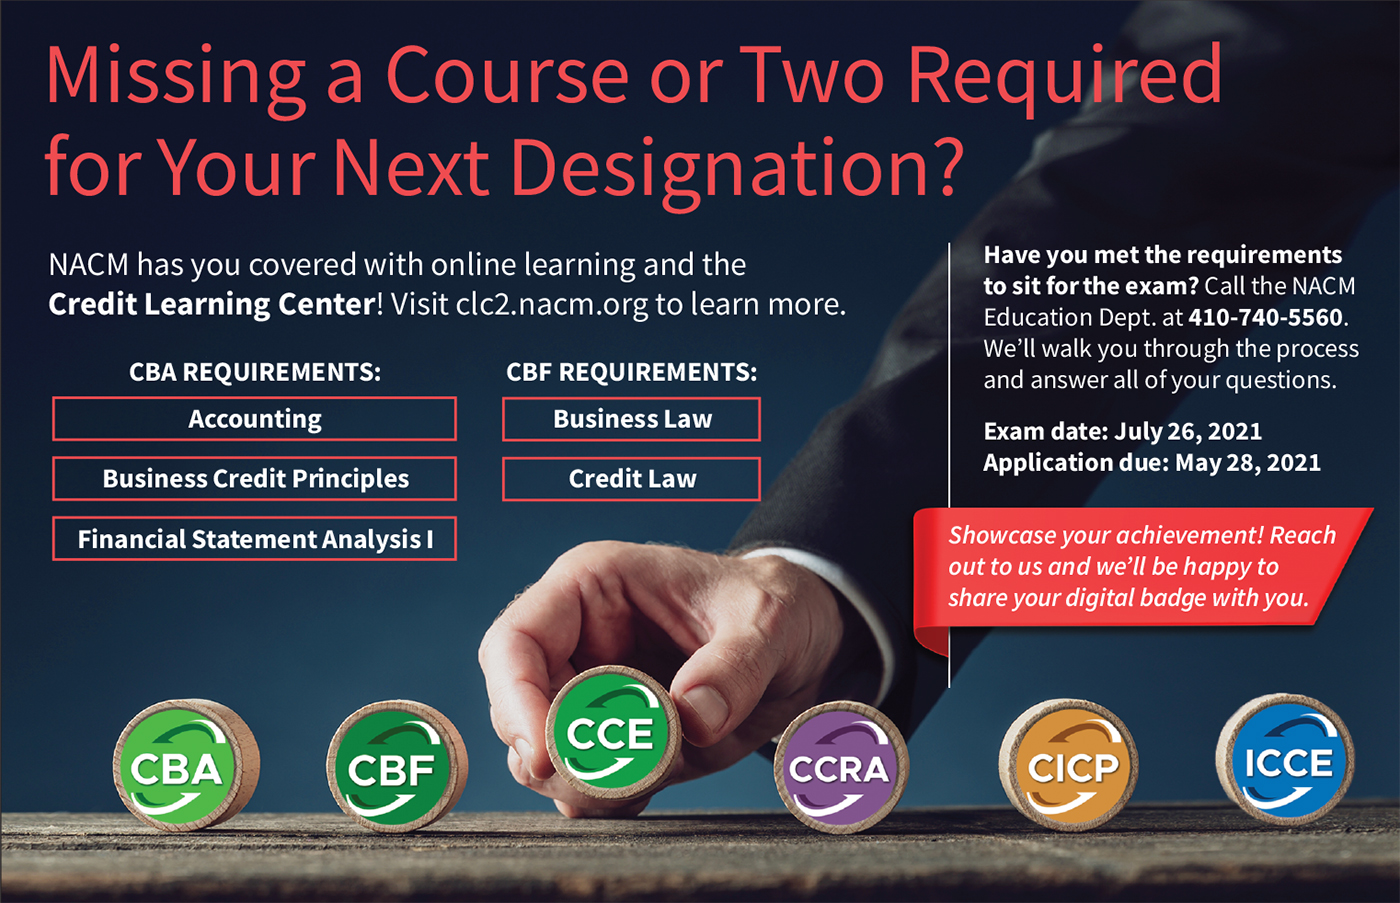 Missing a Course or Two Required for Your Next Designation?